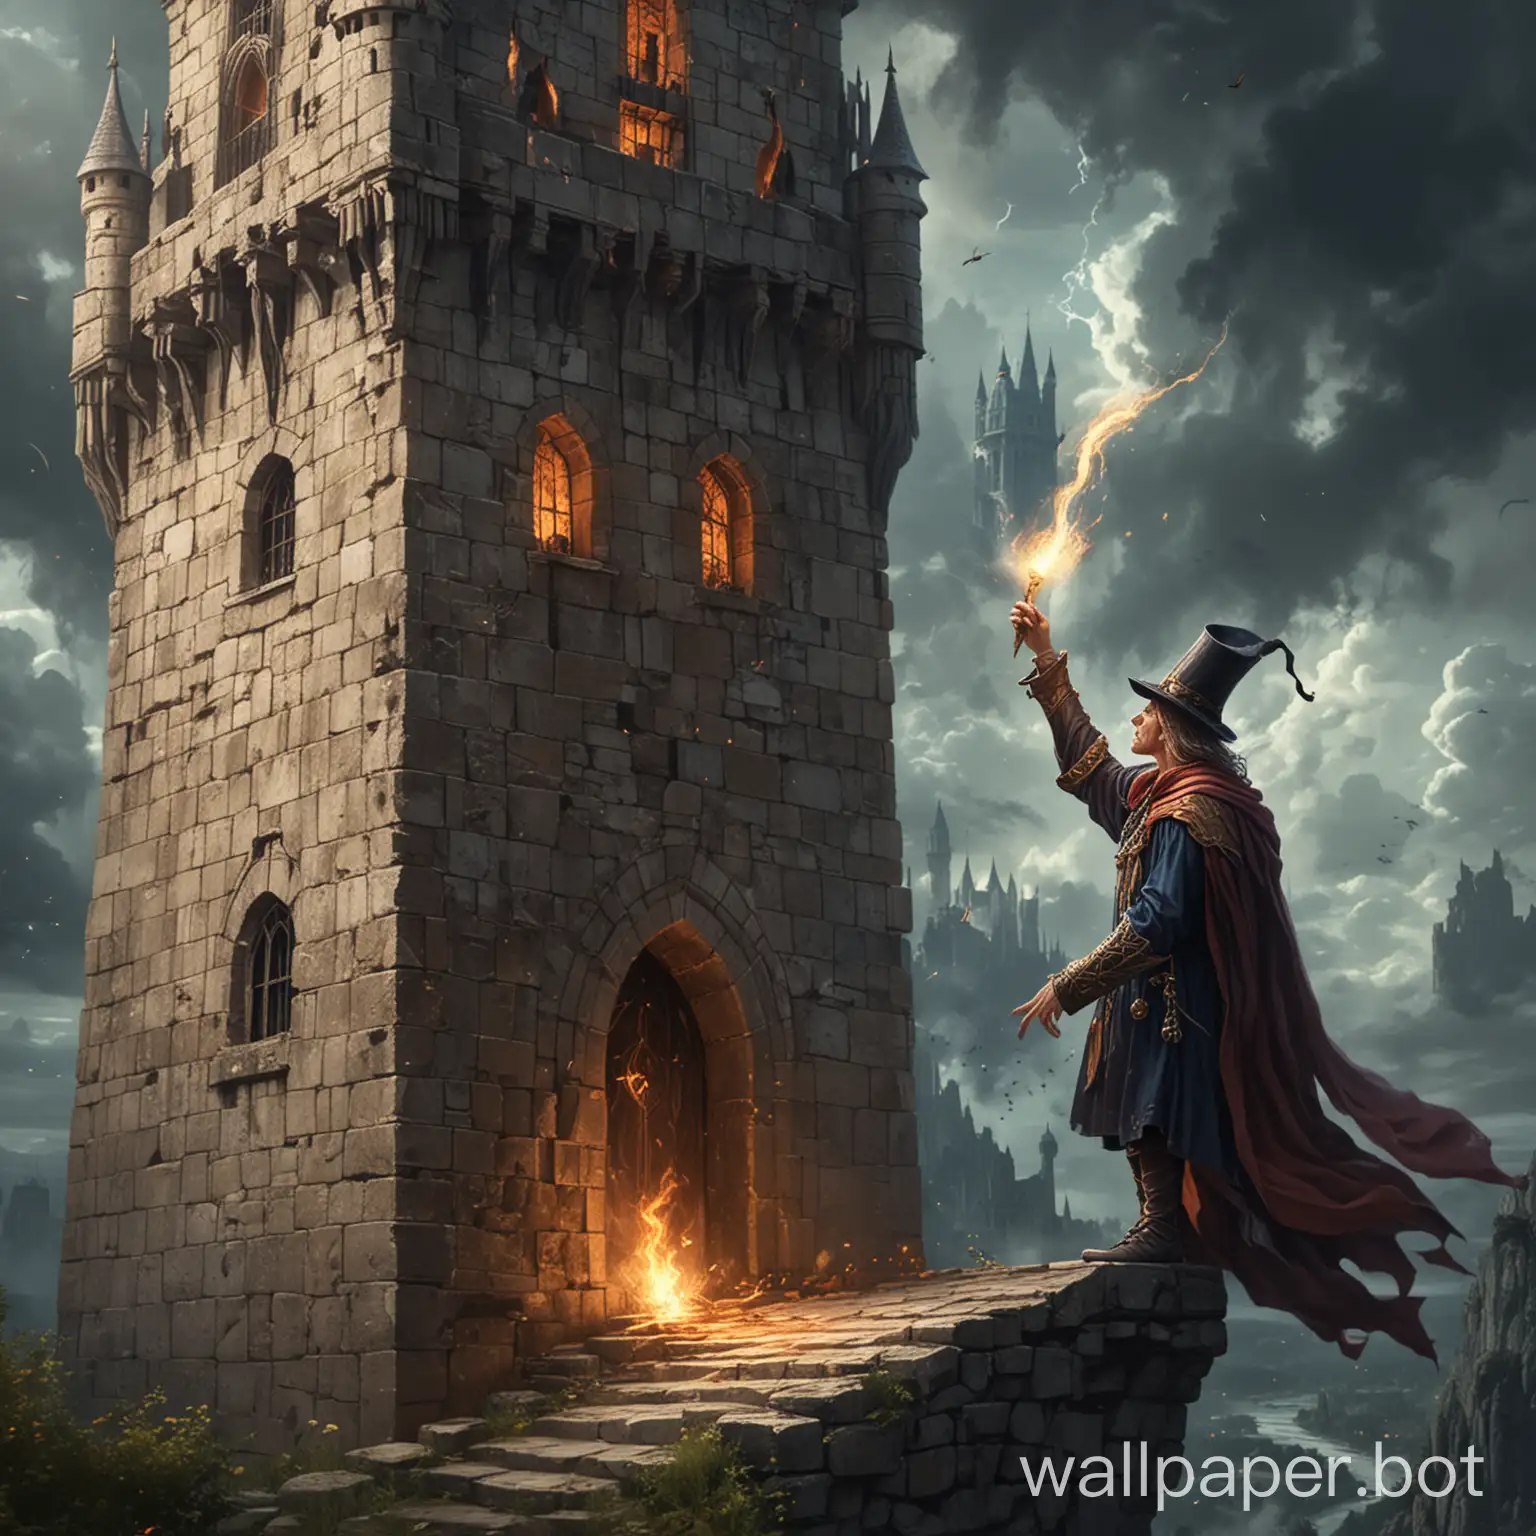 Draw a fantasy magician man who possesses very strong magic, in a tower, to which the king came